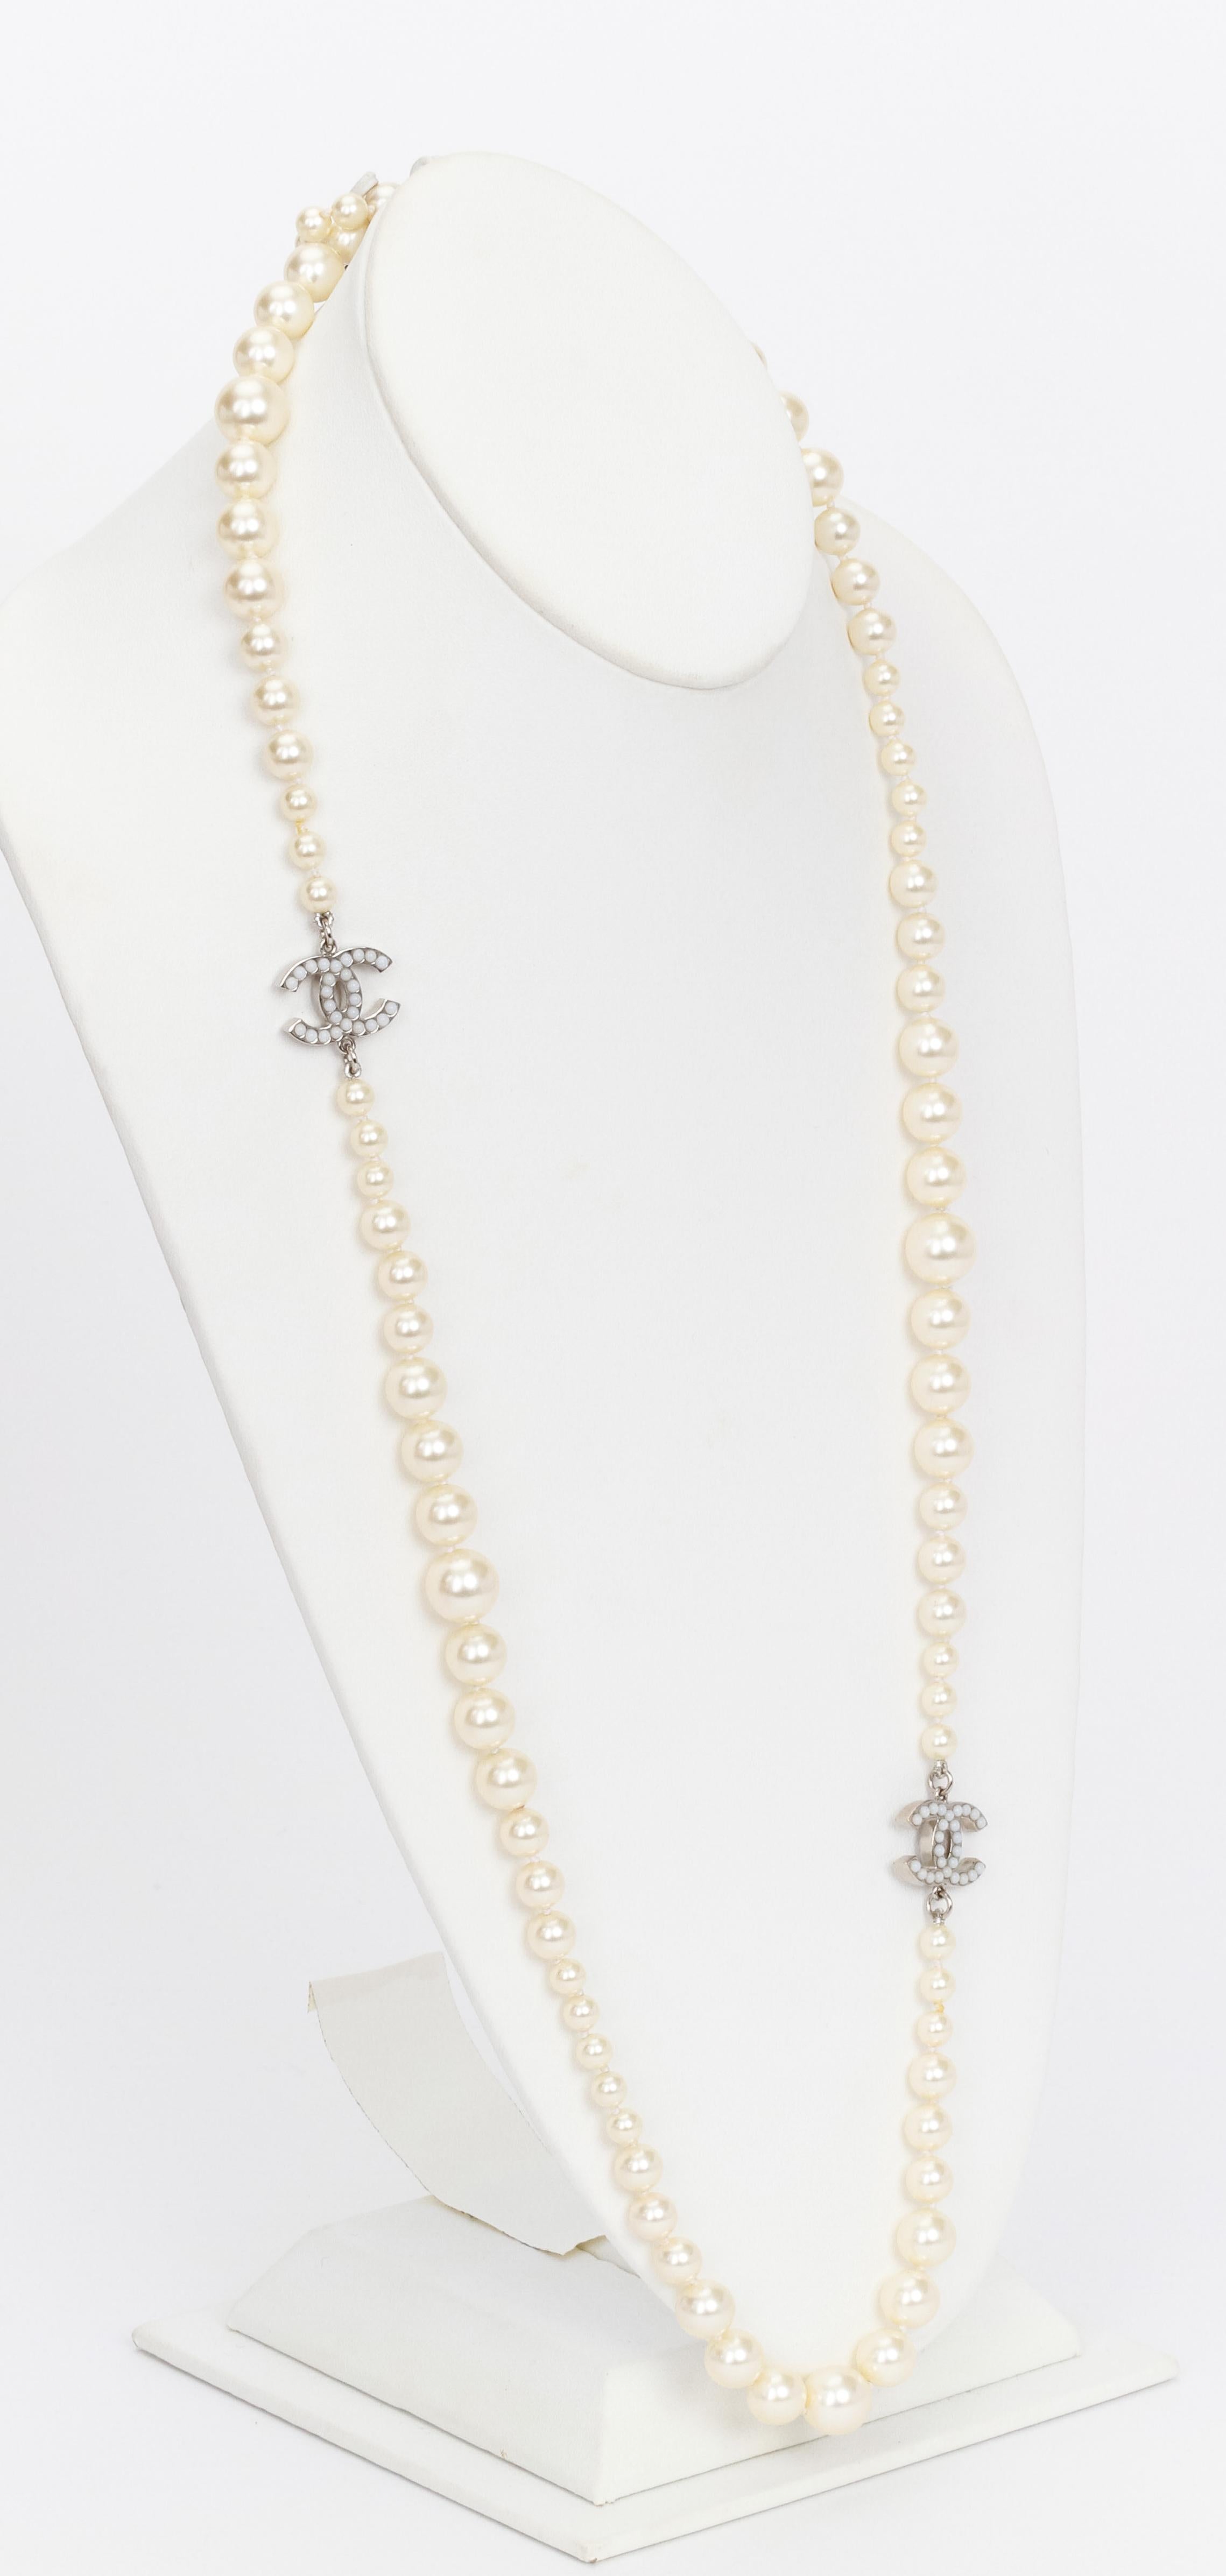 Chanel spring 2012 long pearl necklace with cc logo coins, L 35”, graduated faux pearls. Comes with original box.